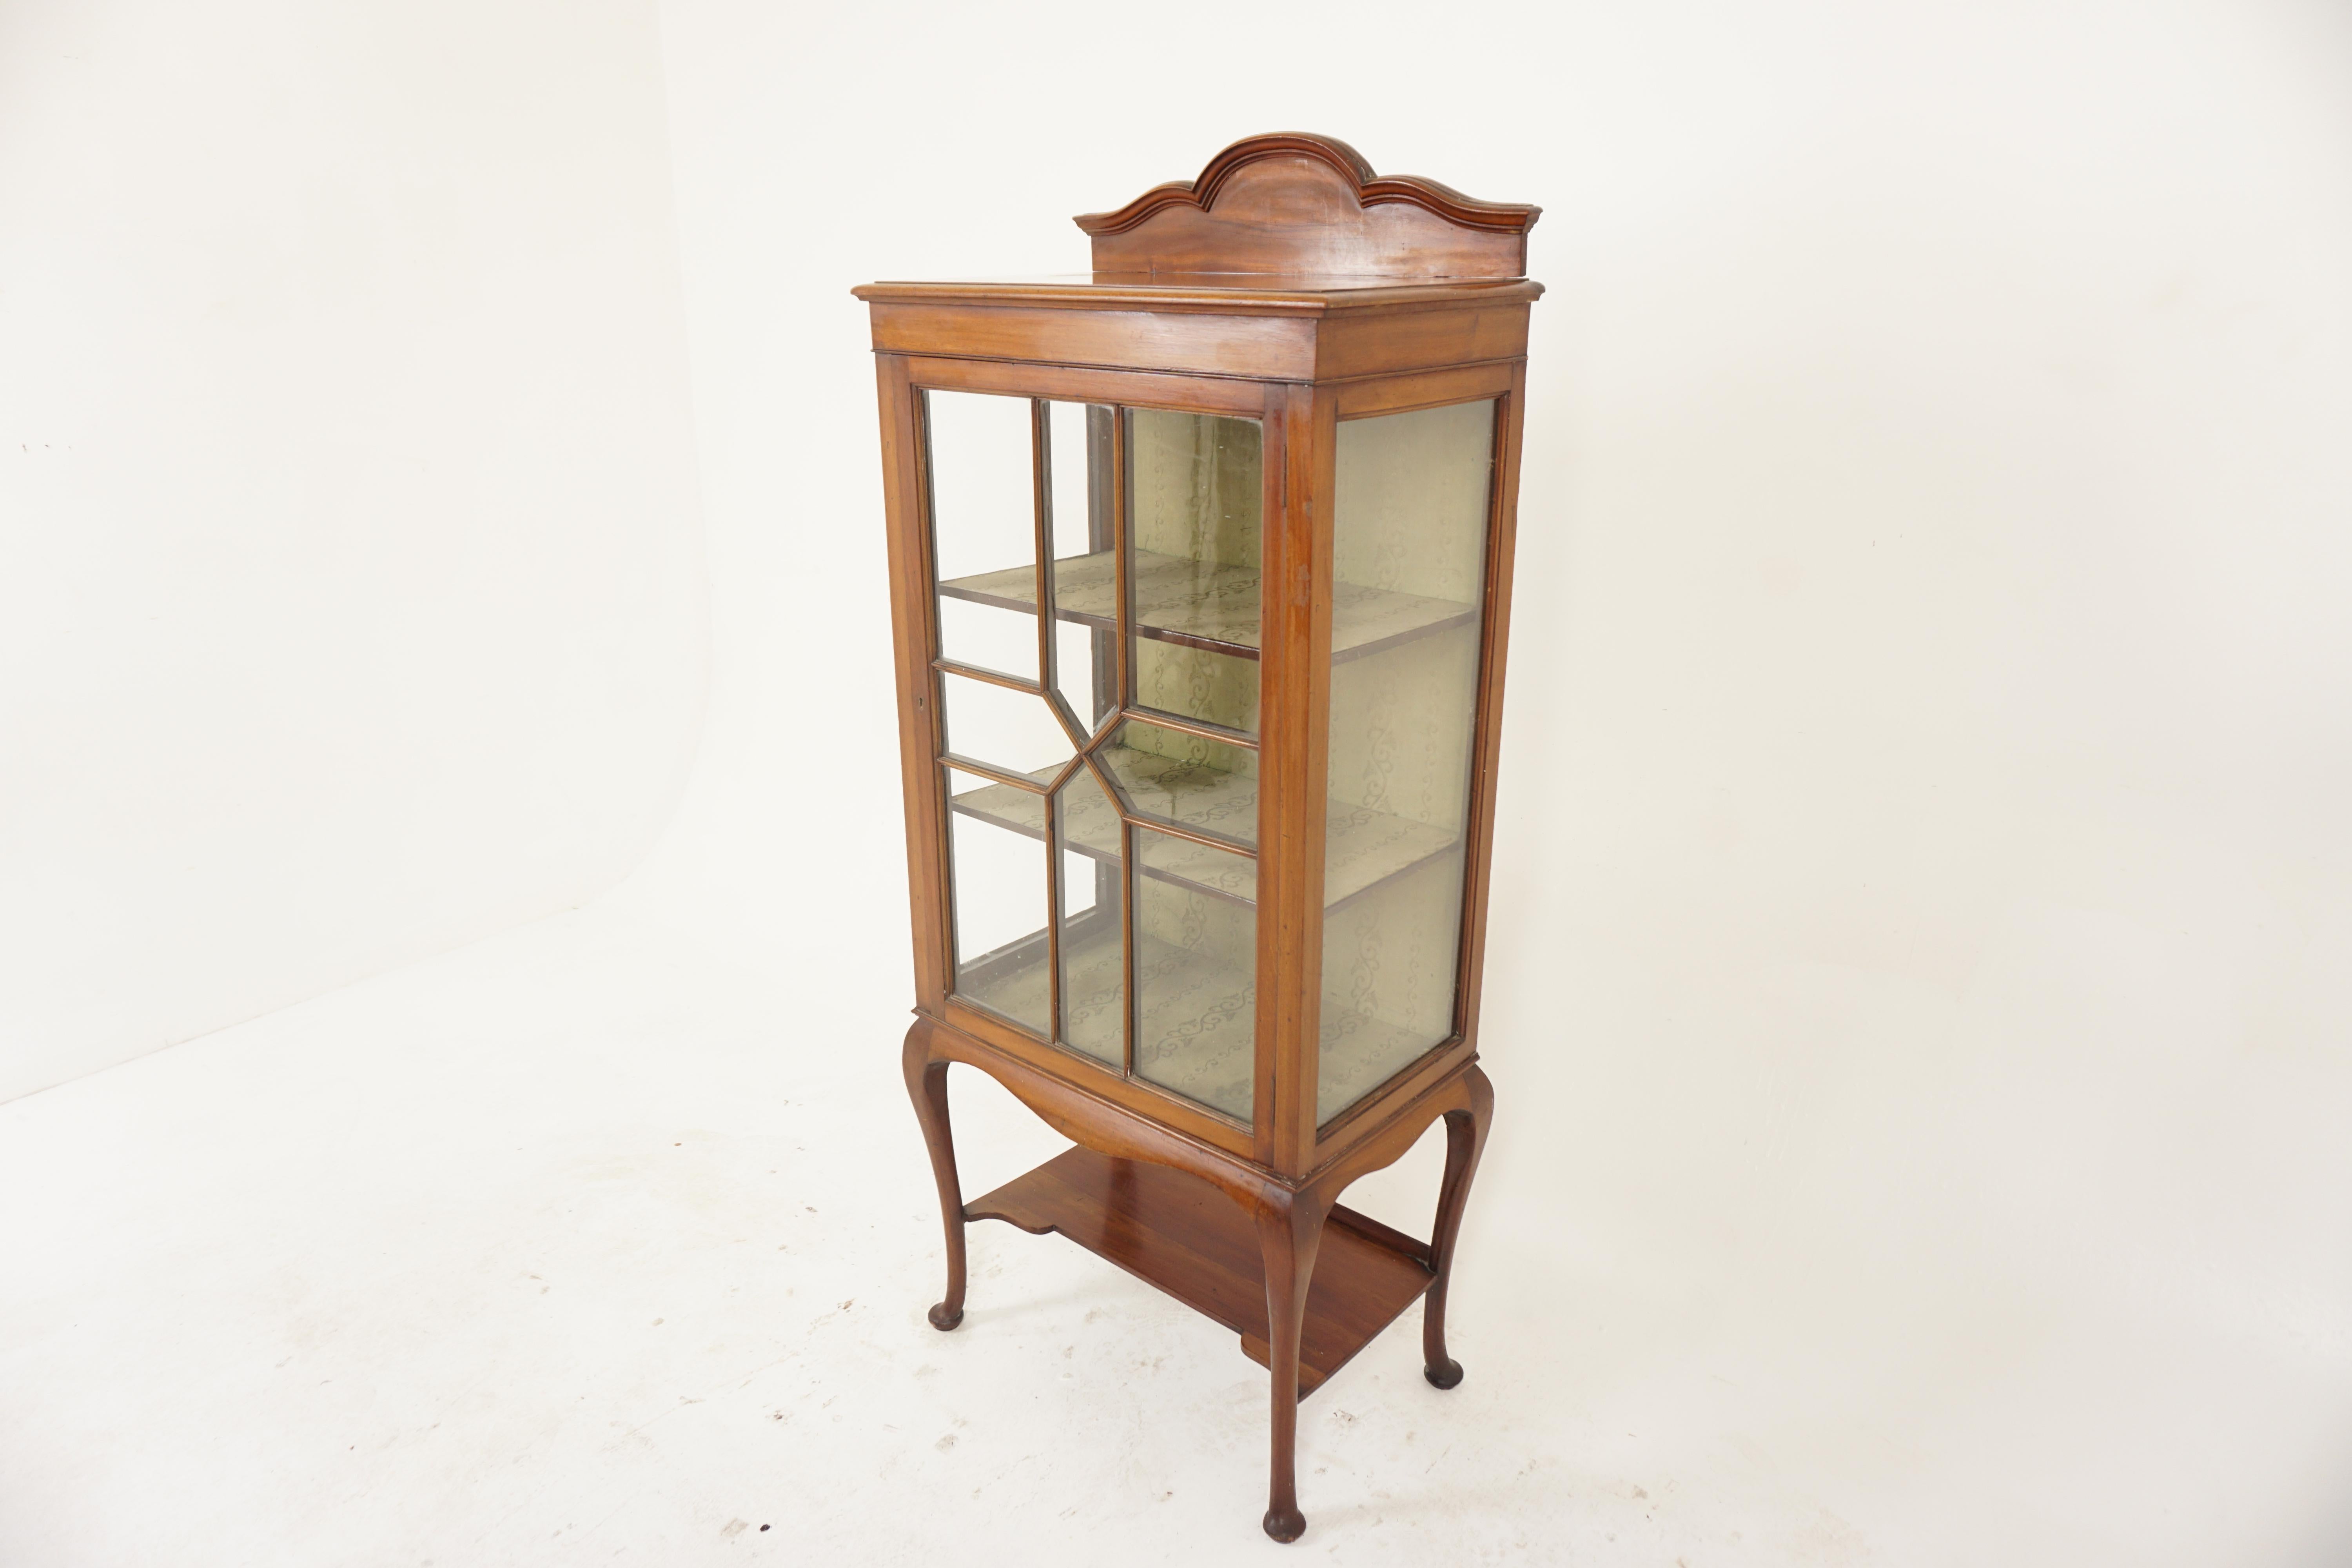 Antique Walnut Single Door Display China Cabinet, Scotland 1900, H142

Scotland 1900
Solid Walnut
Original Finish
With shaped pediment on top
Above single glass door with a geometrical design moulding
Opens to reveal two upholstered shelves and